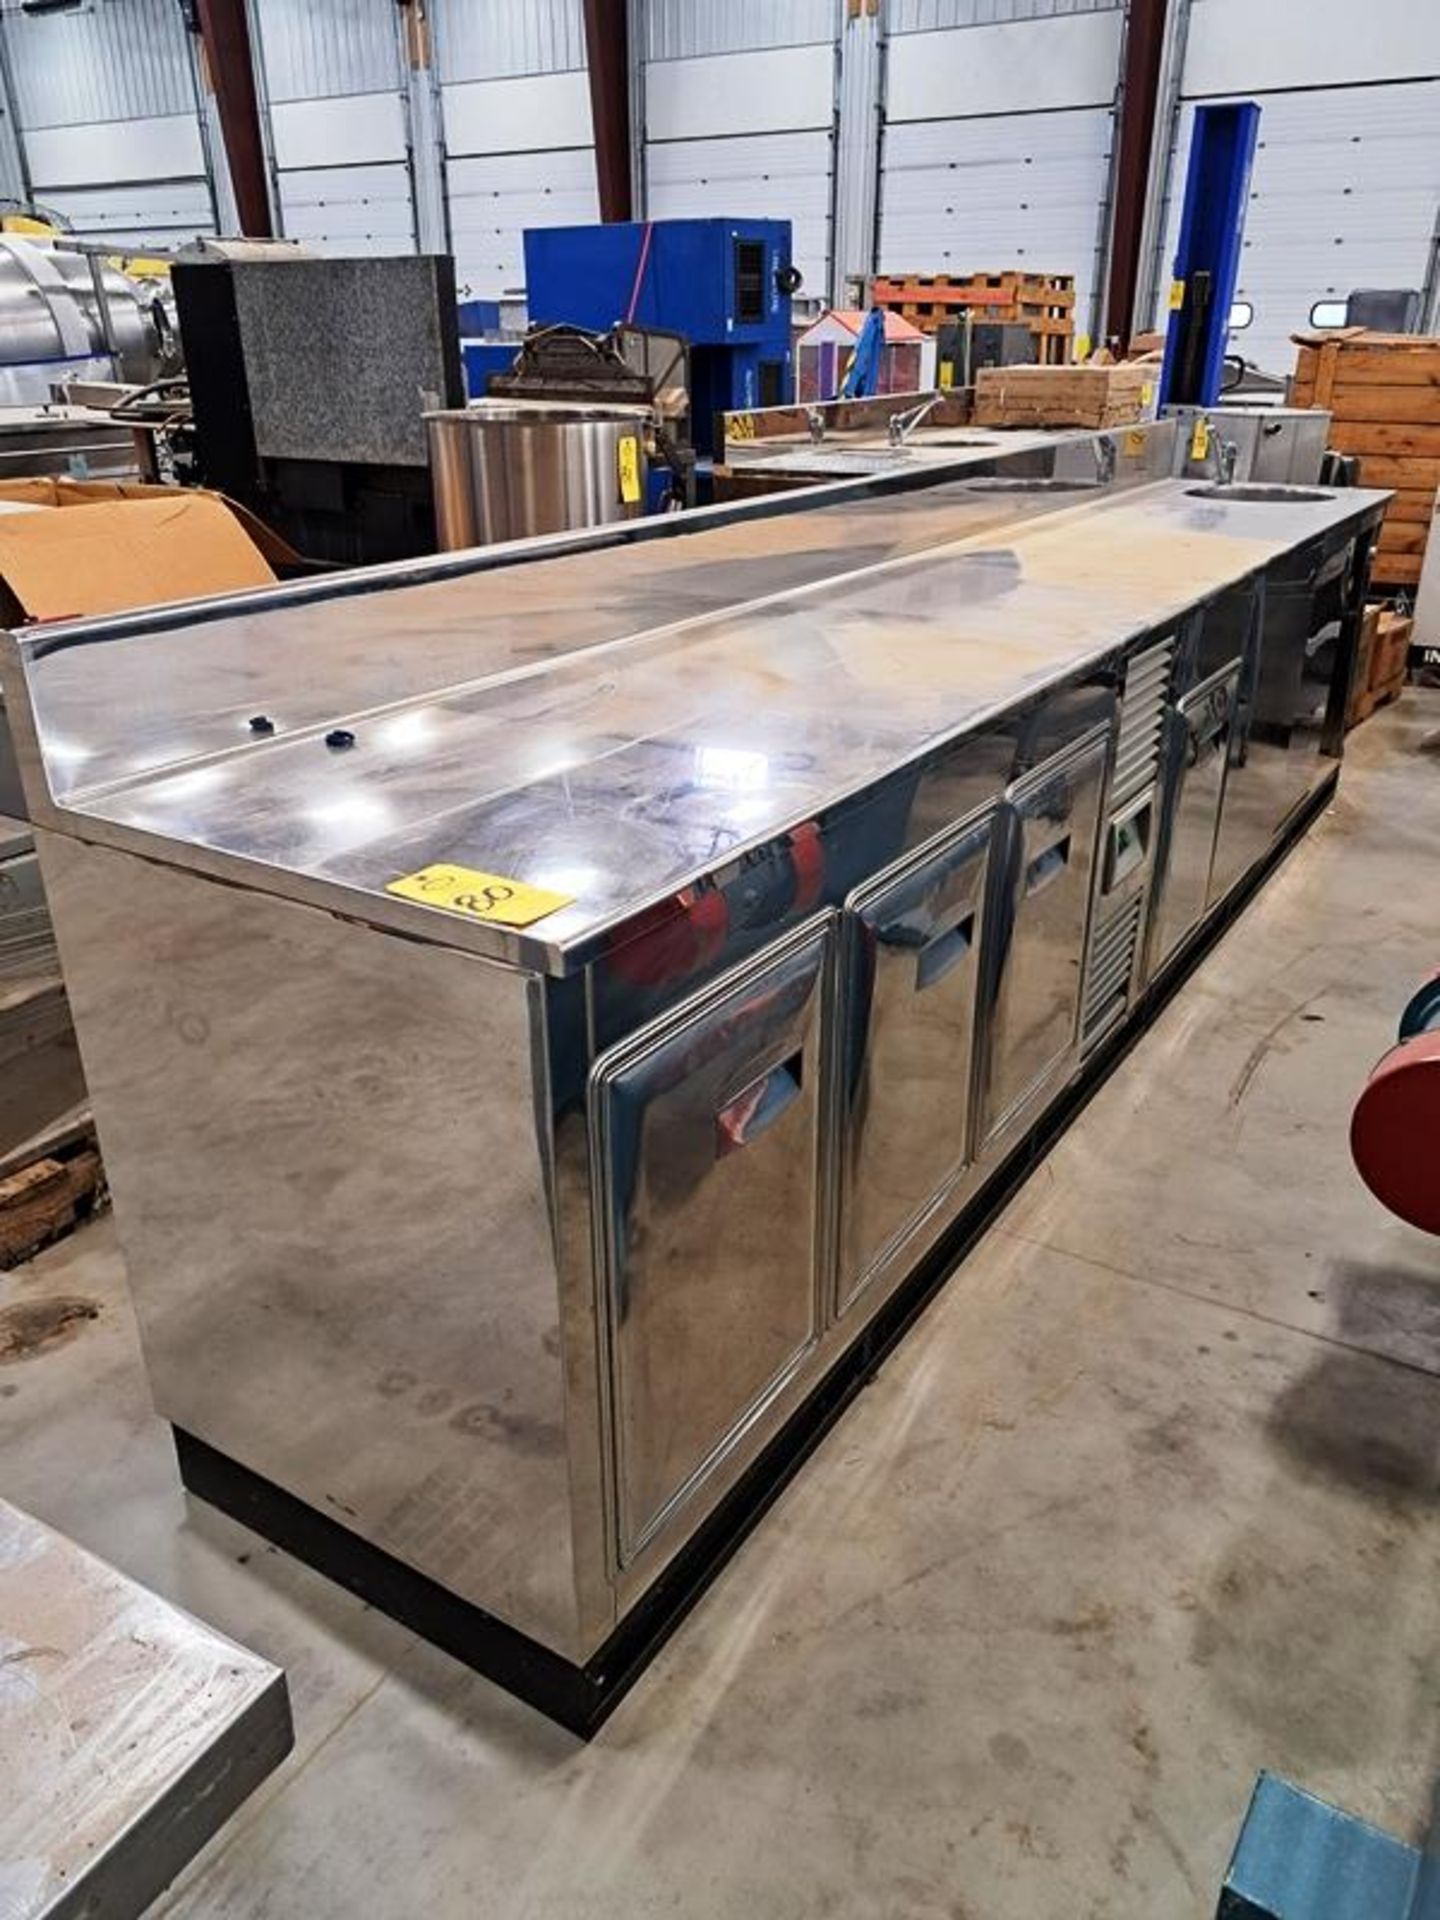 Stainless Steel Cabinet with sink, refrigerated, 26" wide X 13' long, 3-refrigerated doors, 2-door